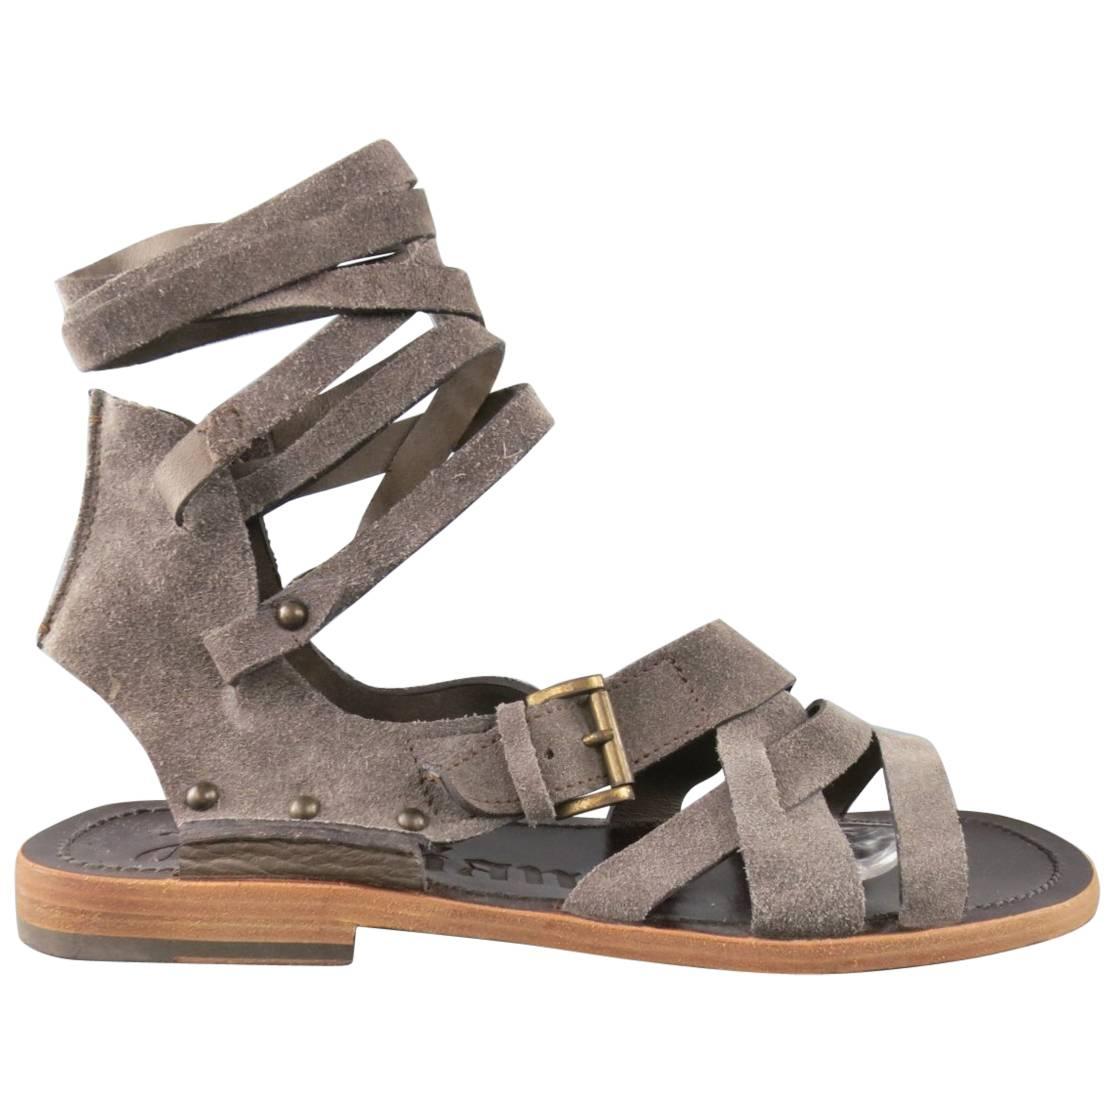 Men's JOHN GALLIANO Size 9 Grey Suede Gladiator Wrapped Ankle Strap Sandals